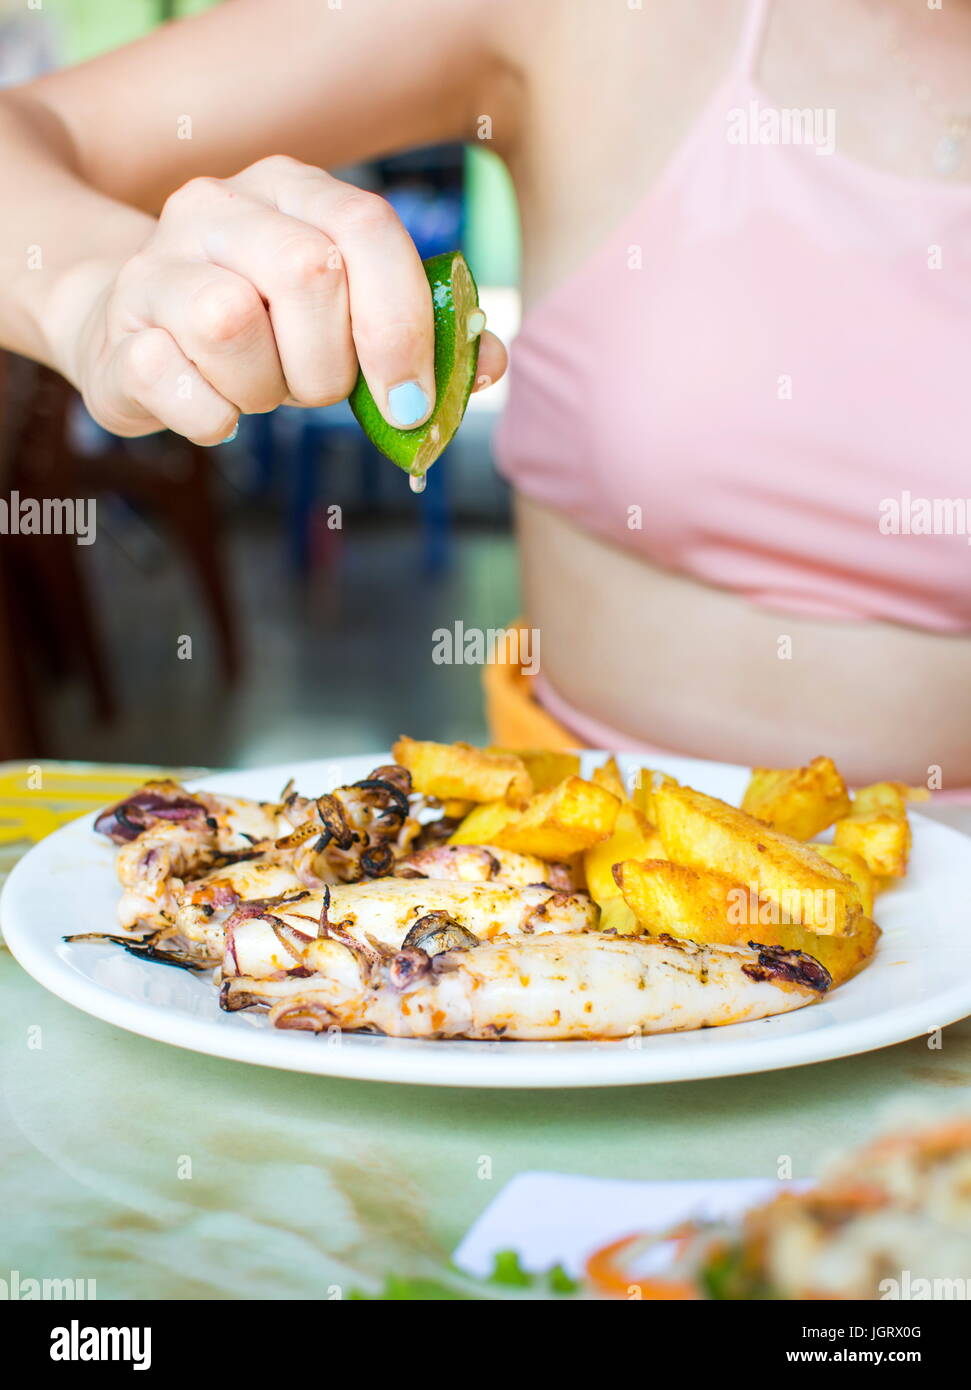 Female hand squeezing lime on grilled squid with french fries Stock Photo